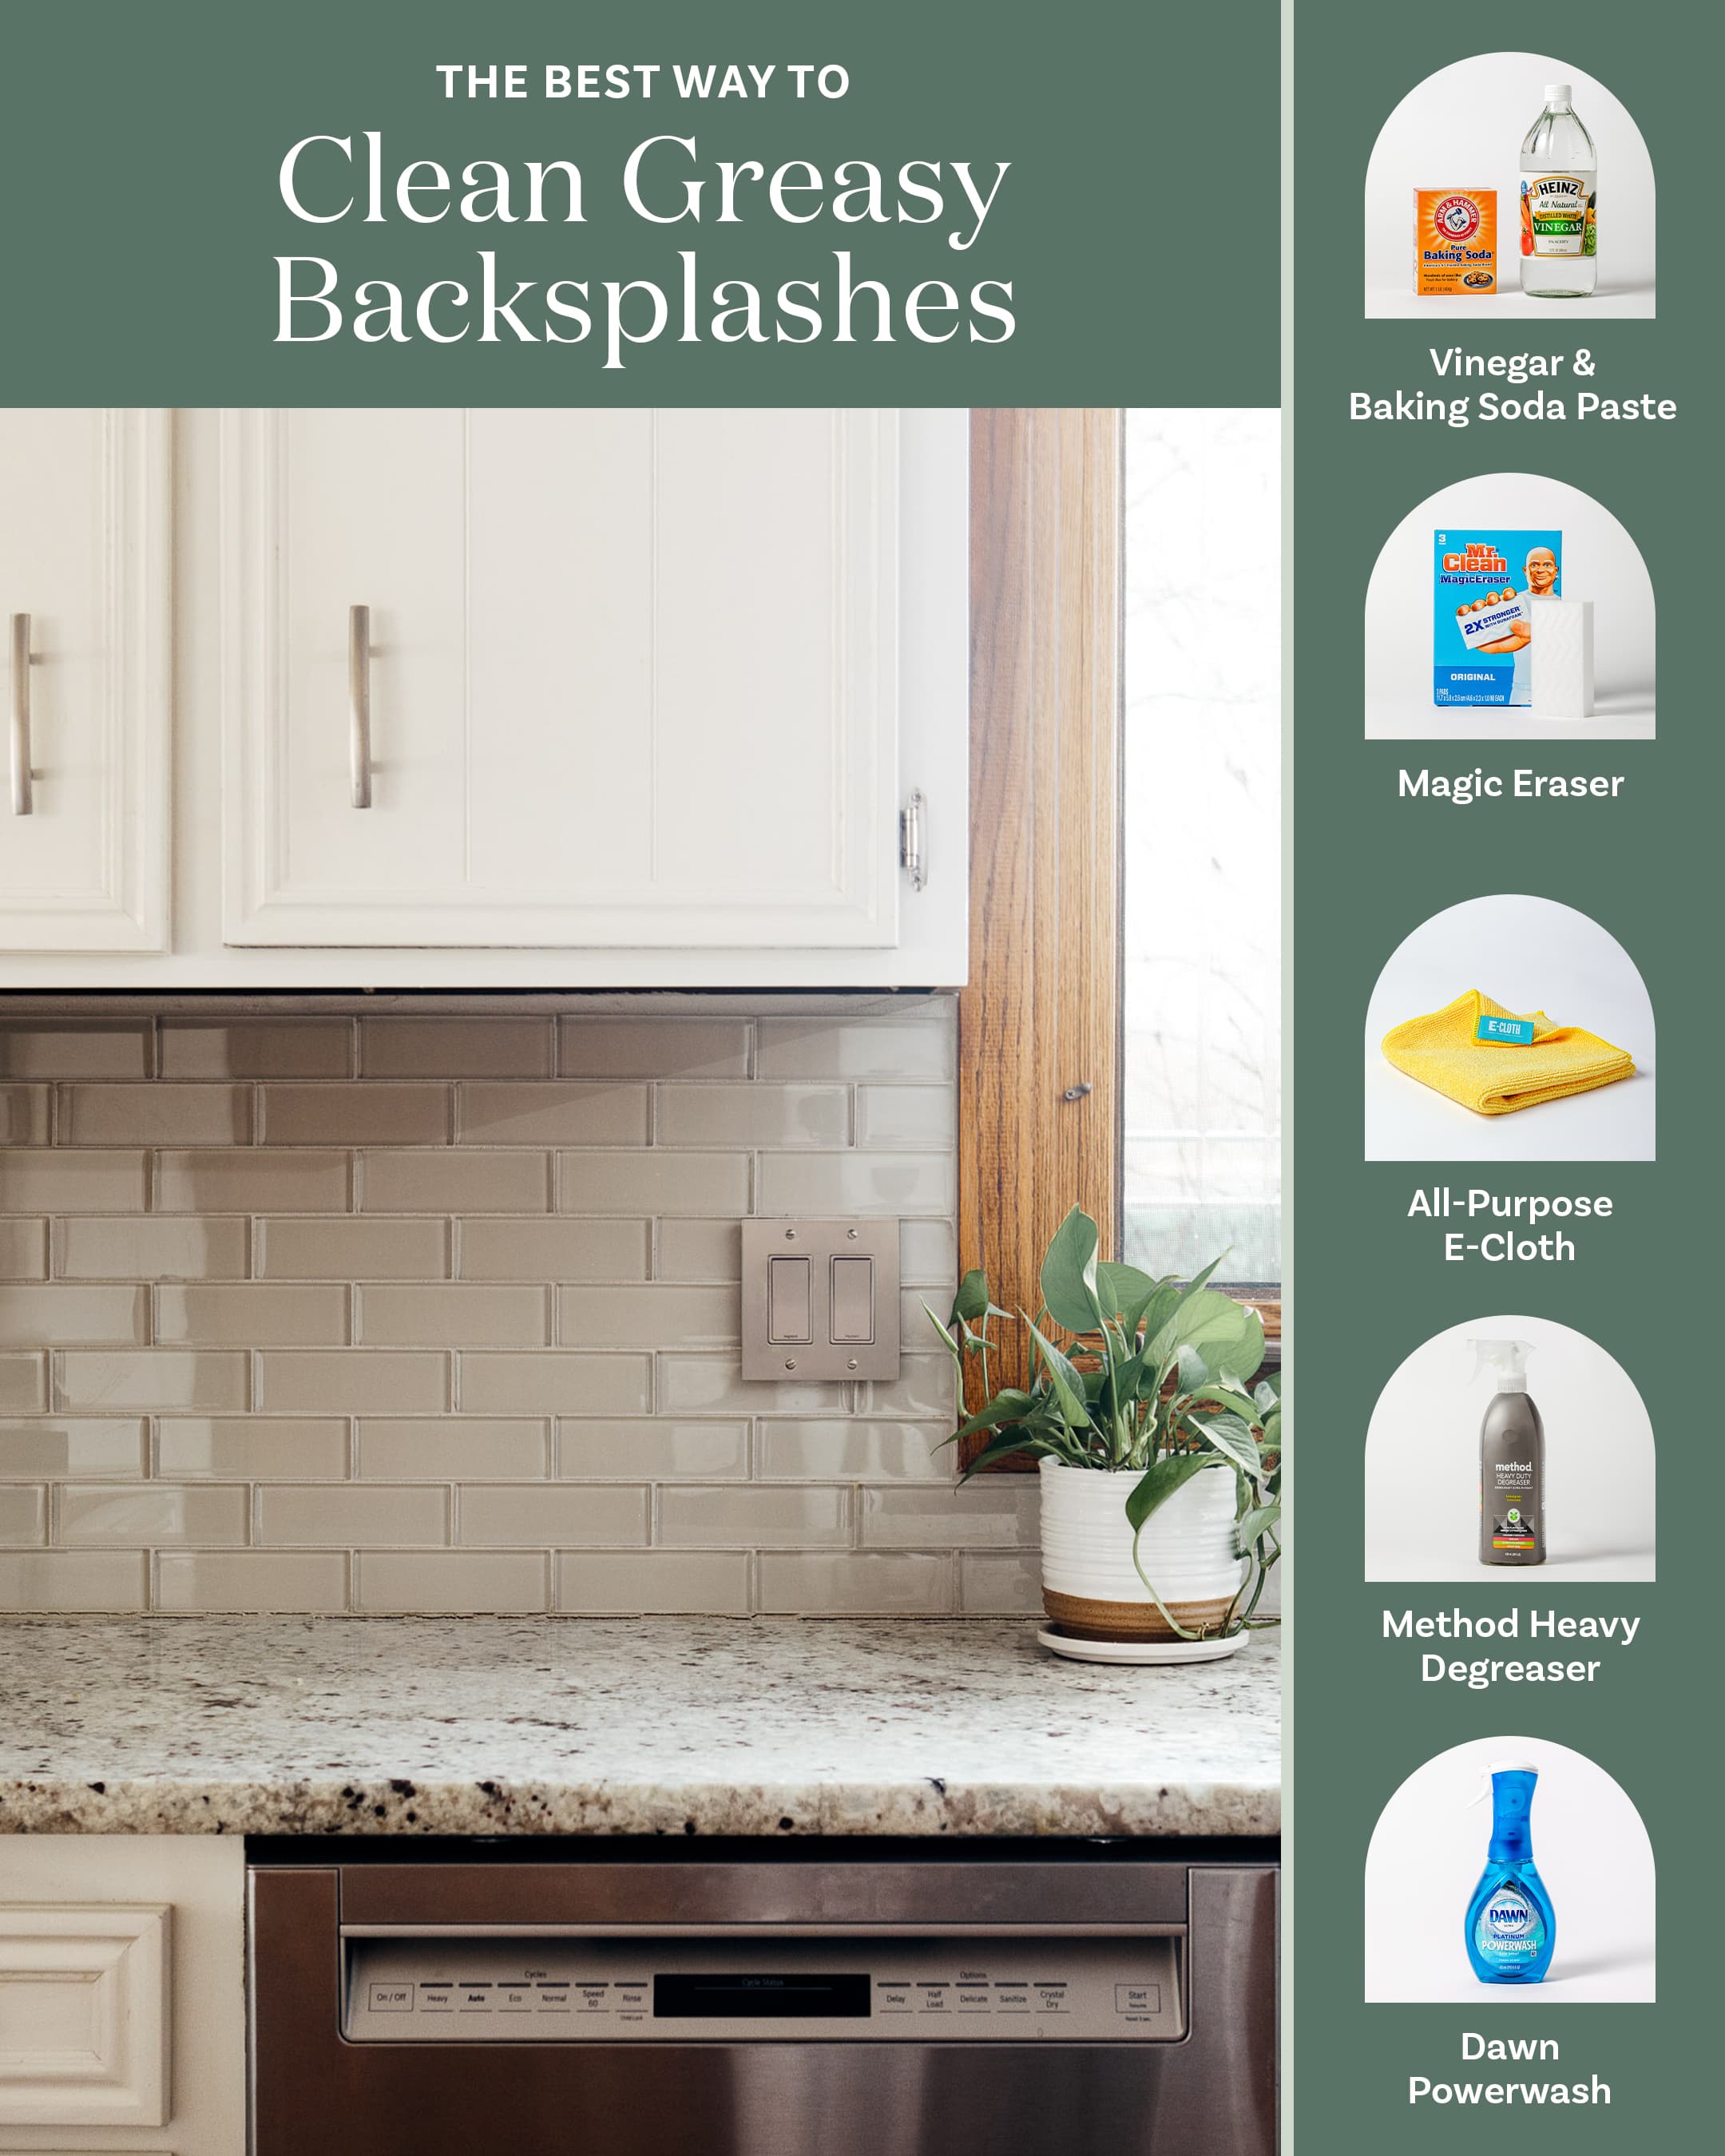 The Best Way to Remove Grease from Kitchen Backsplashes